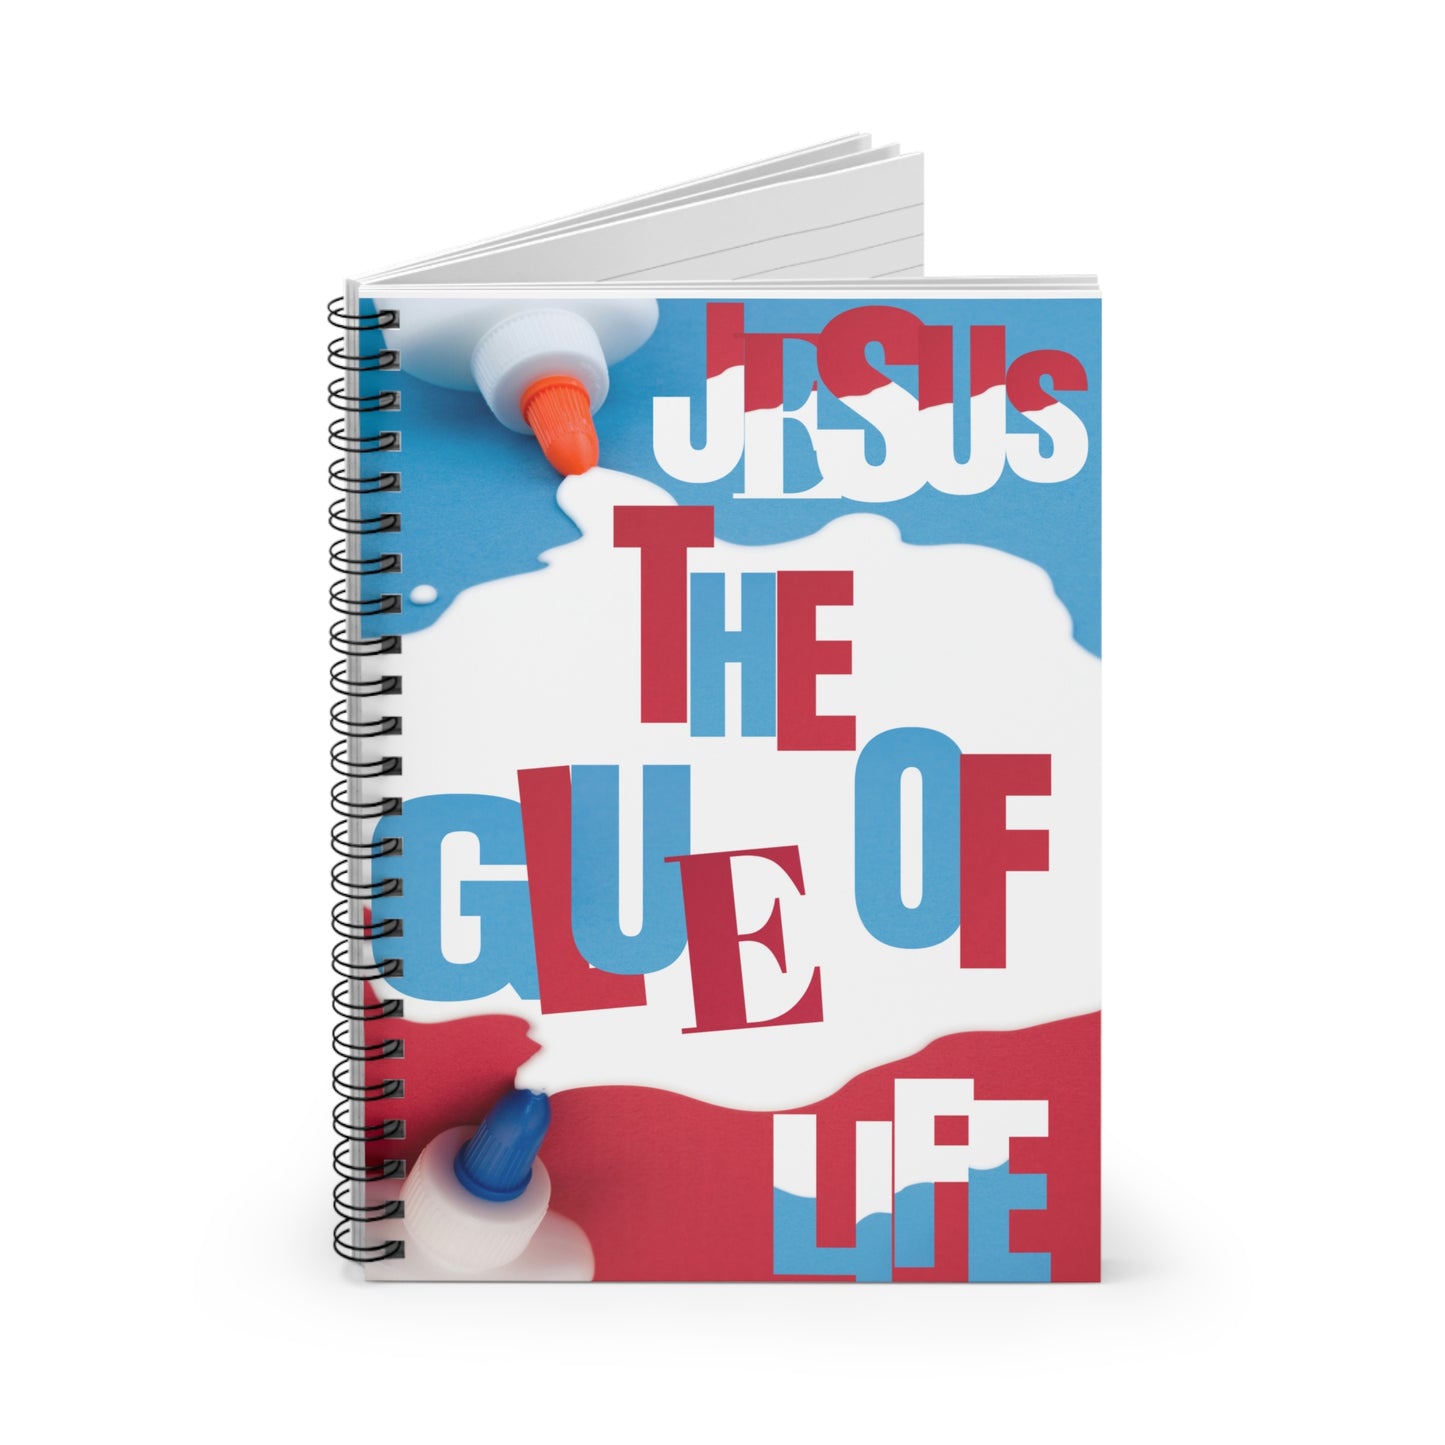 Jesus The Glue of Life Spiral Notebook - Ruled Line